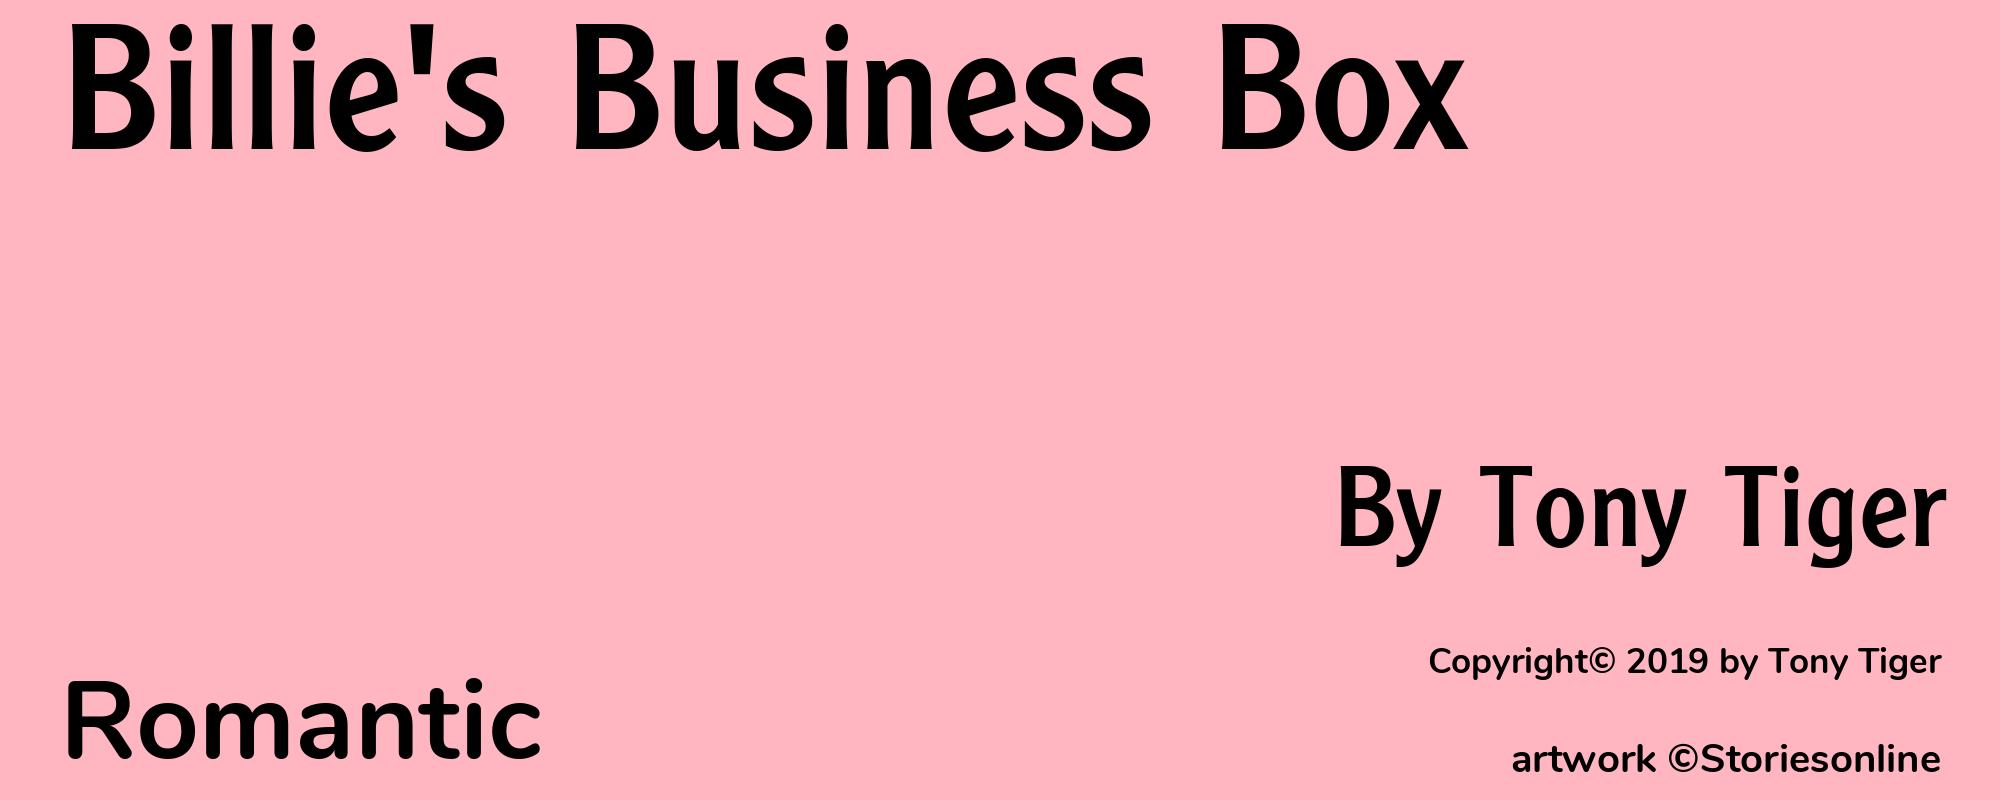 Billie's Business Box - Cover